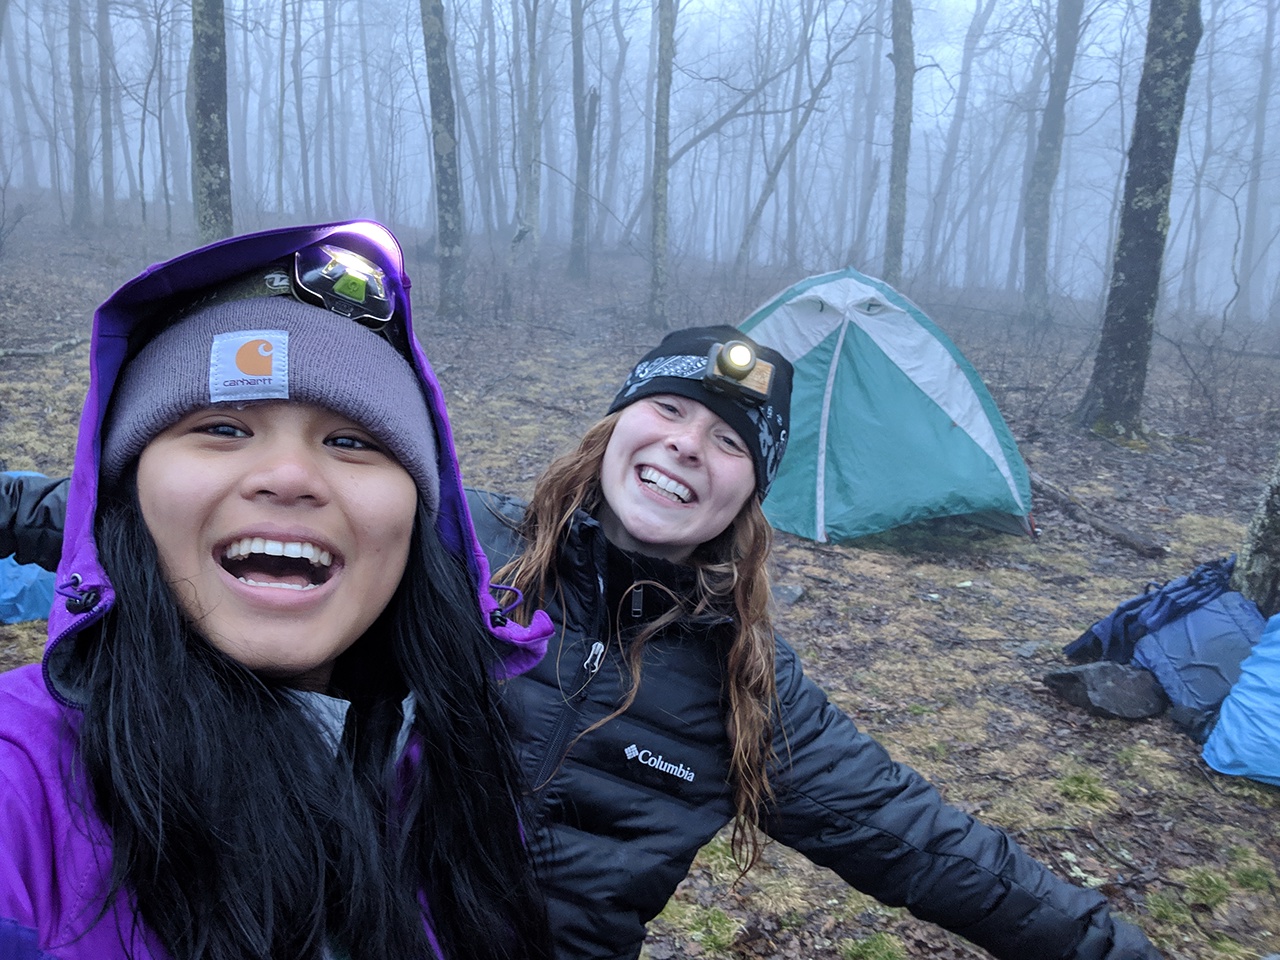 Two female students smiling in front a a tent in the outdoors.